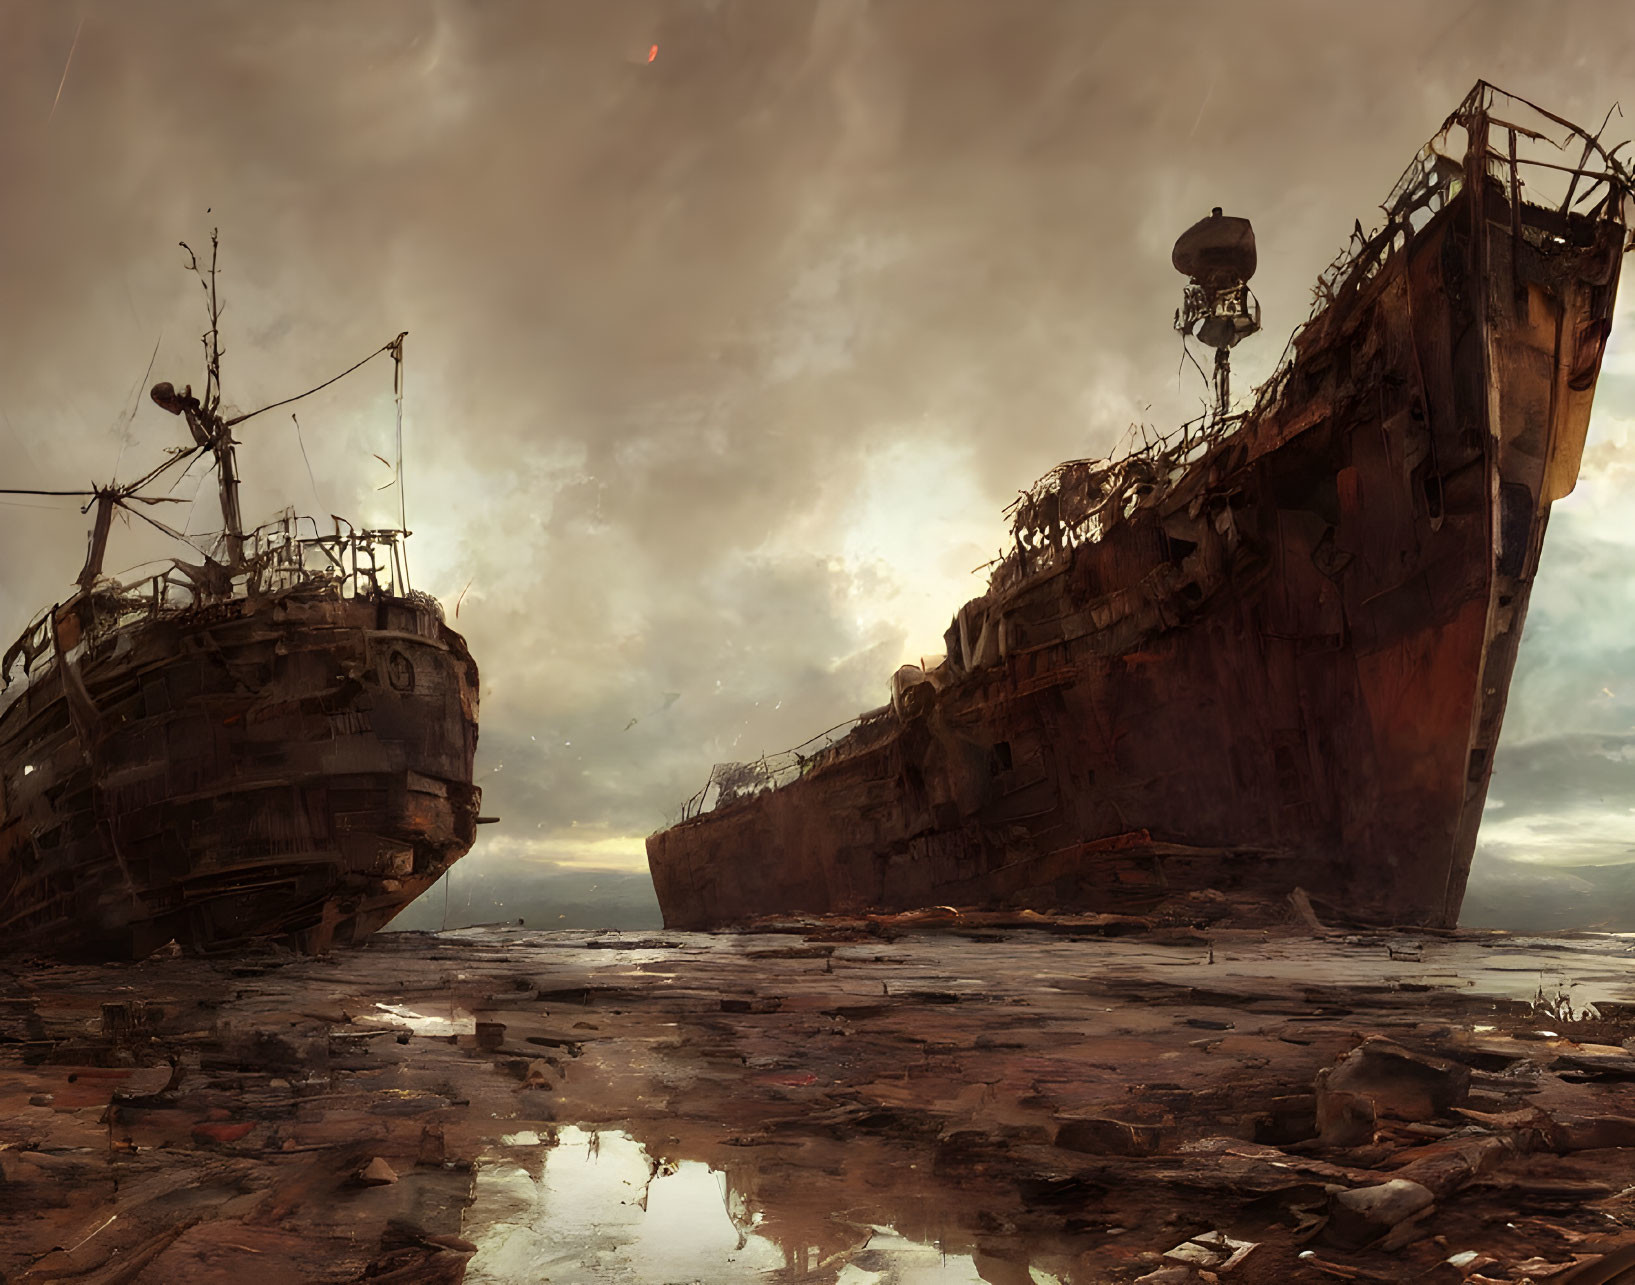 Desolate landscape with rusted ships under cloudy sky